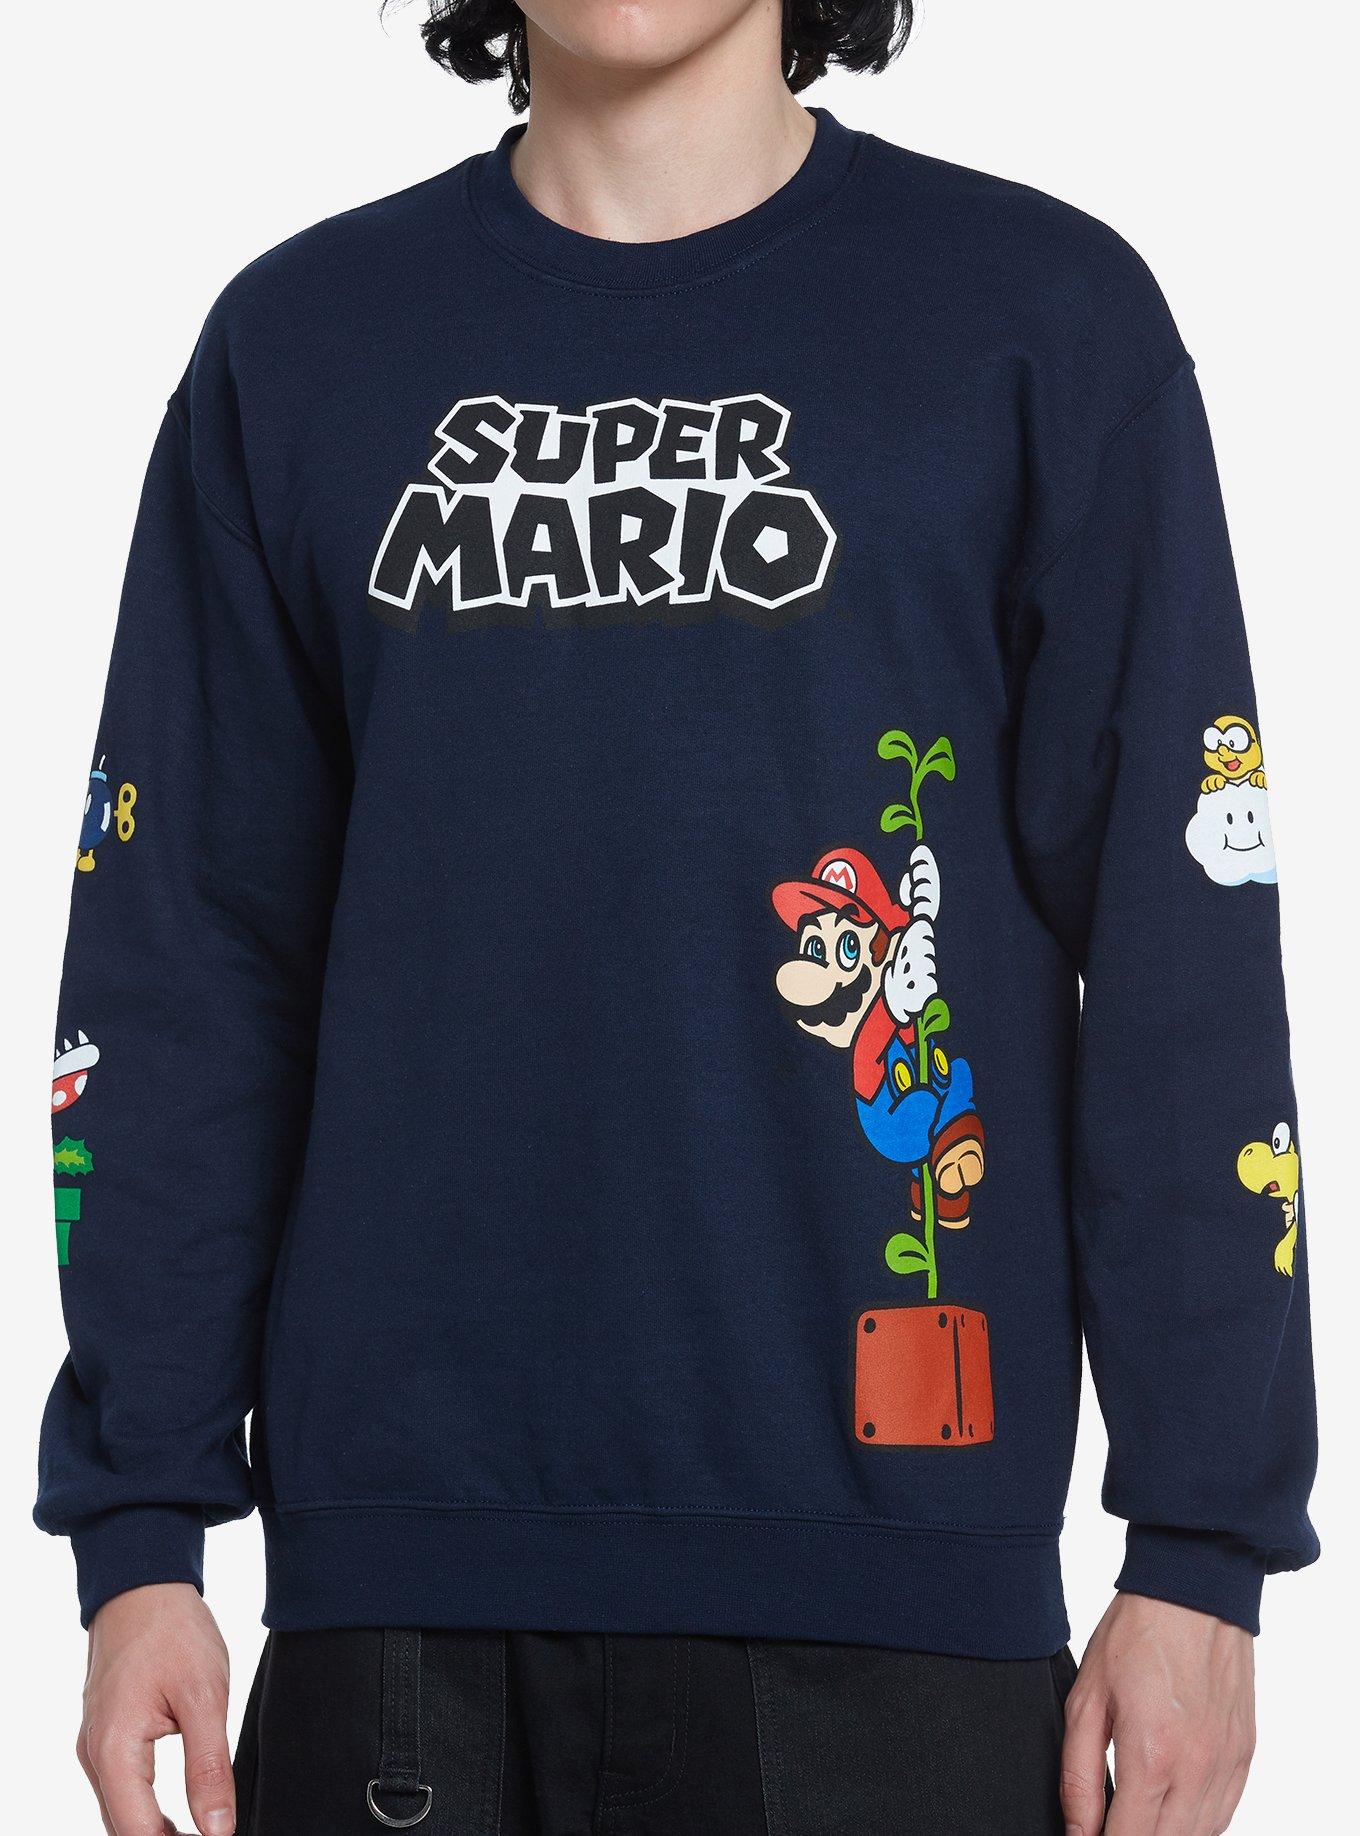 Super Sonic X Super Mario Bros 3 Shirt, hoodie, sweater and long sleeve